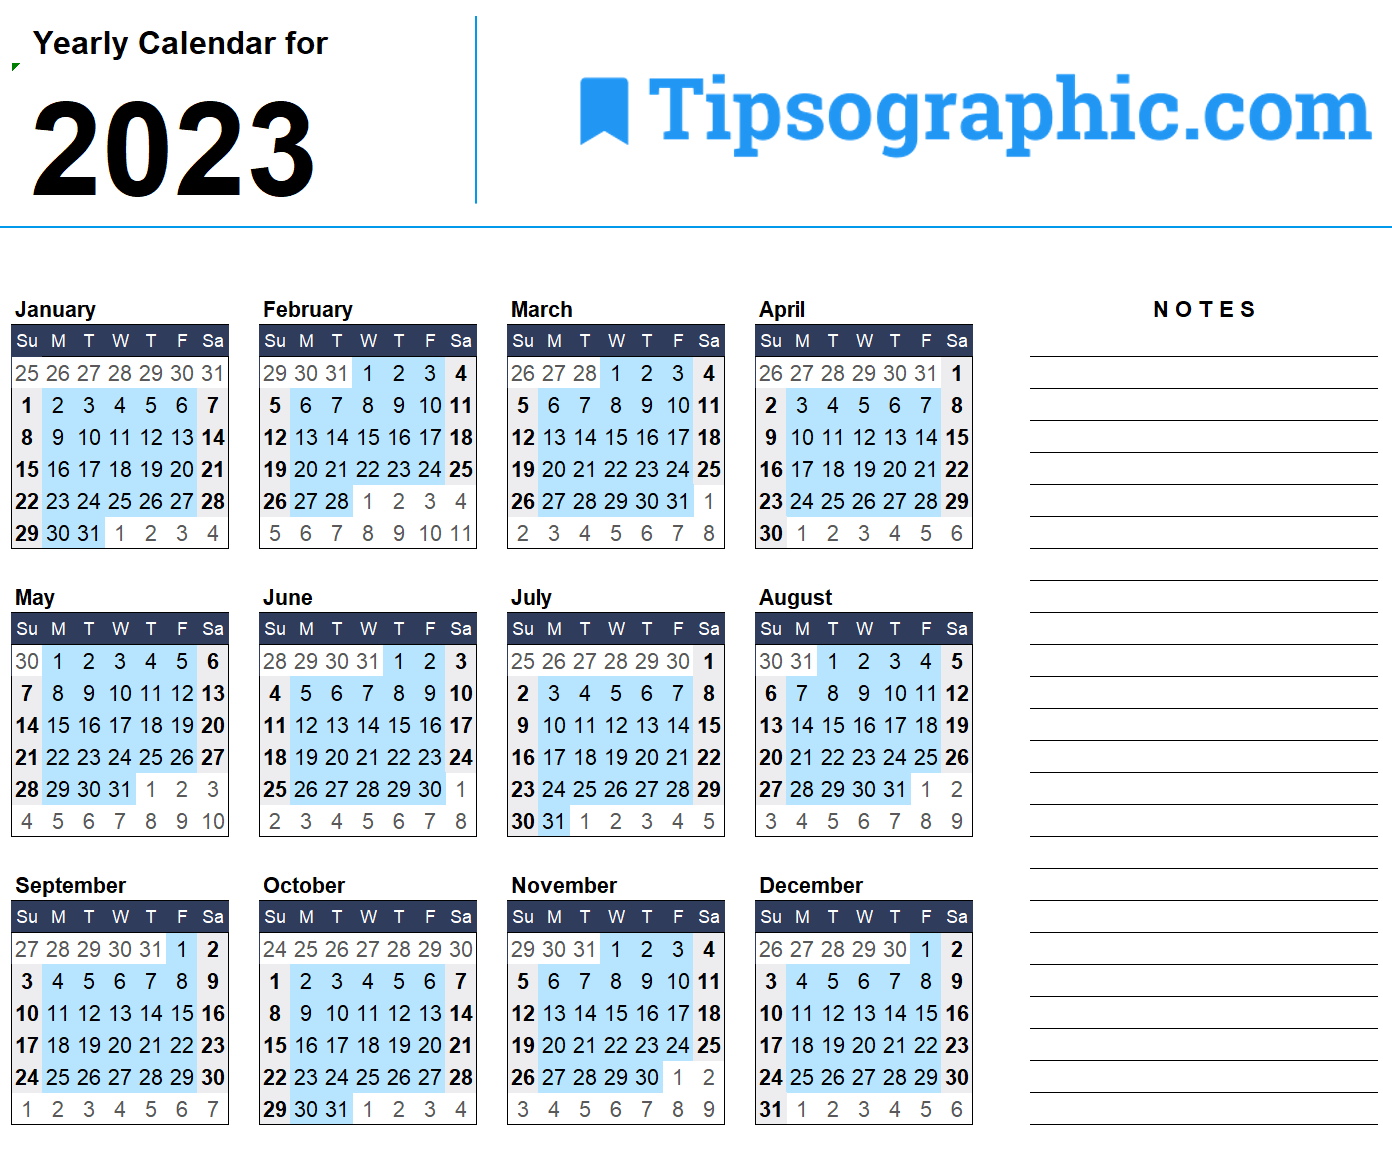 2023-yearly-calendar-excel-tipsographic